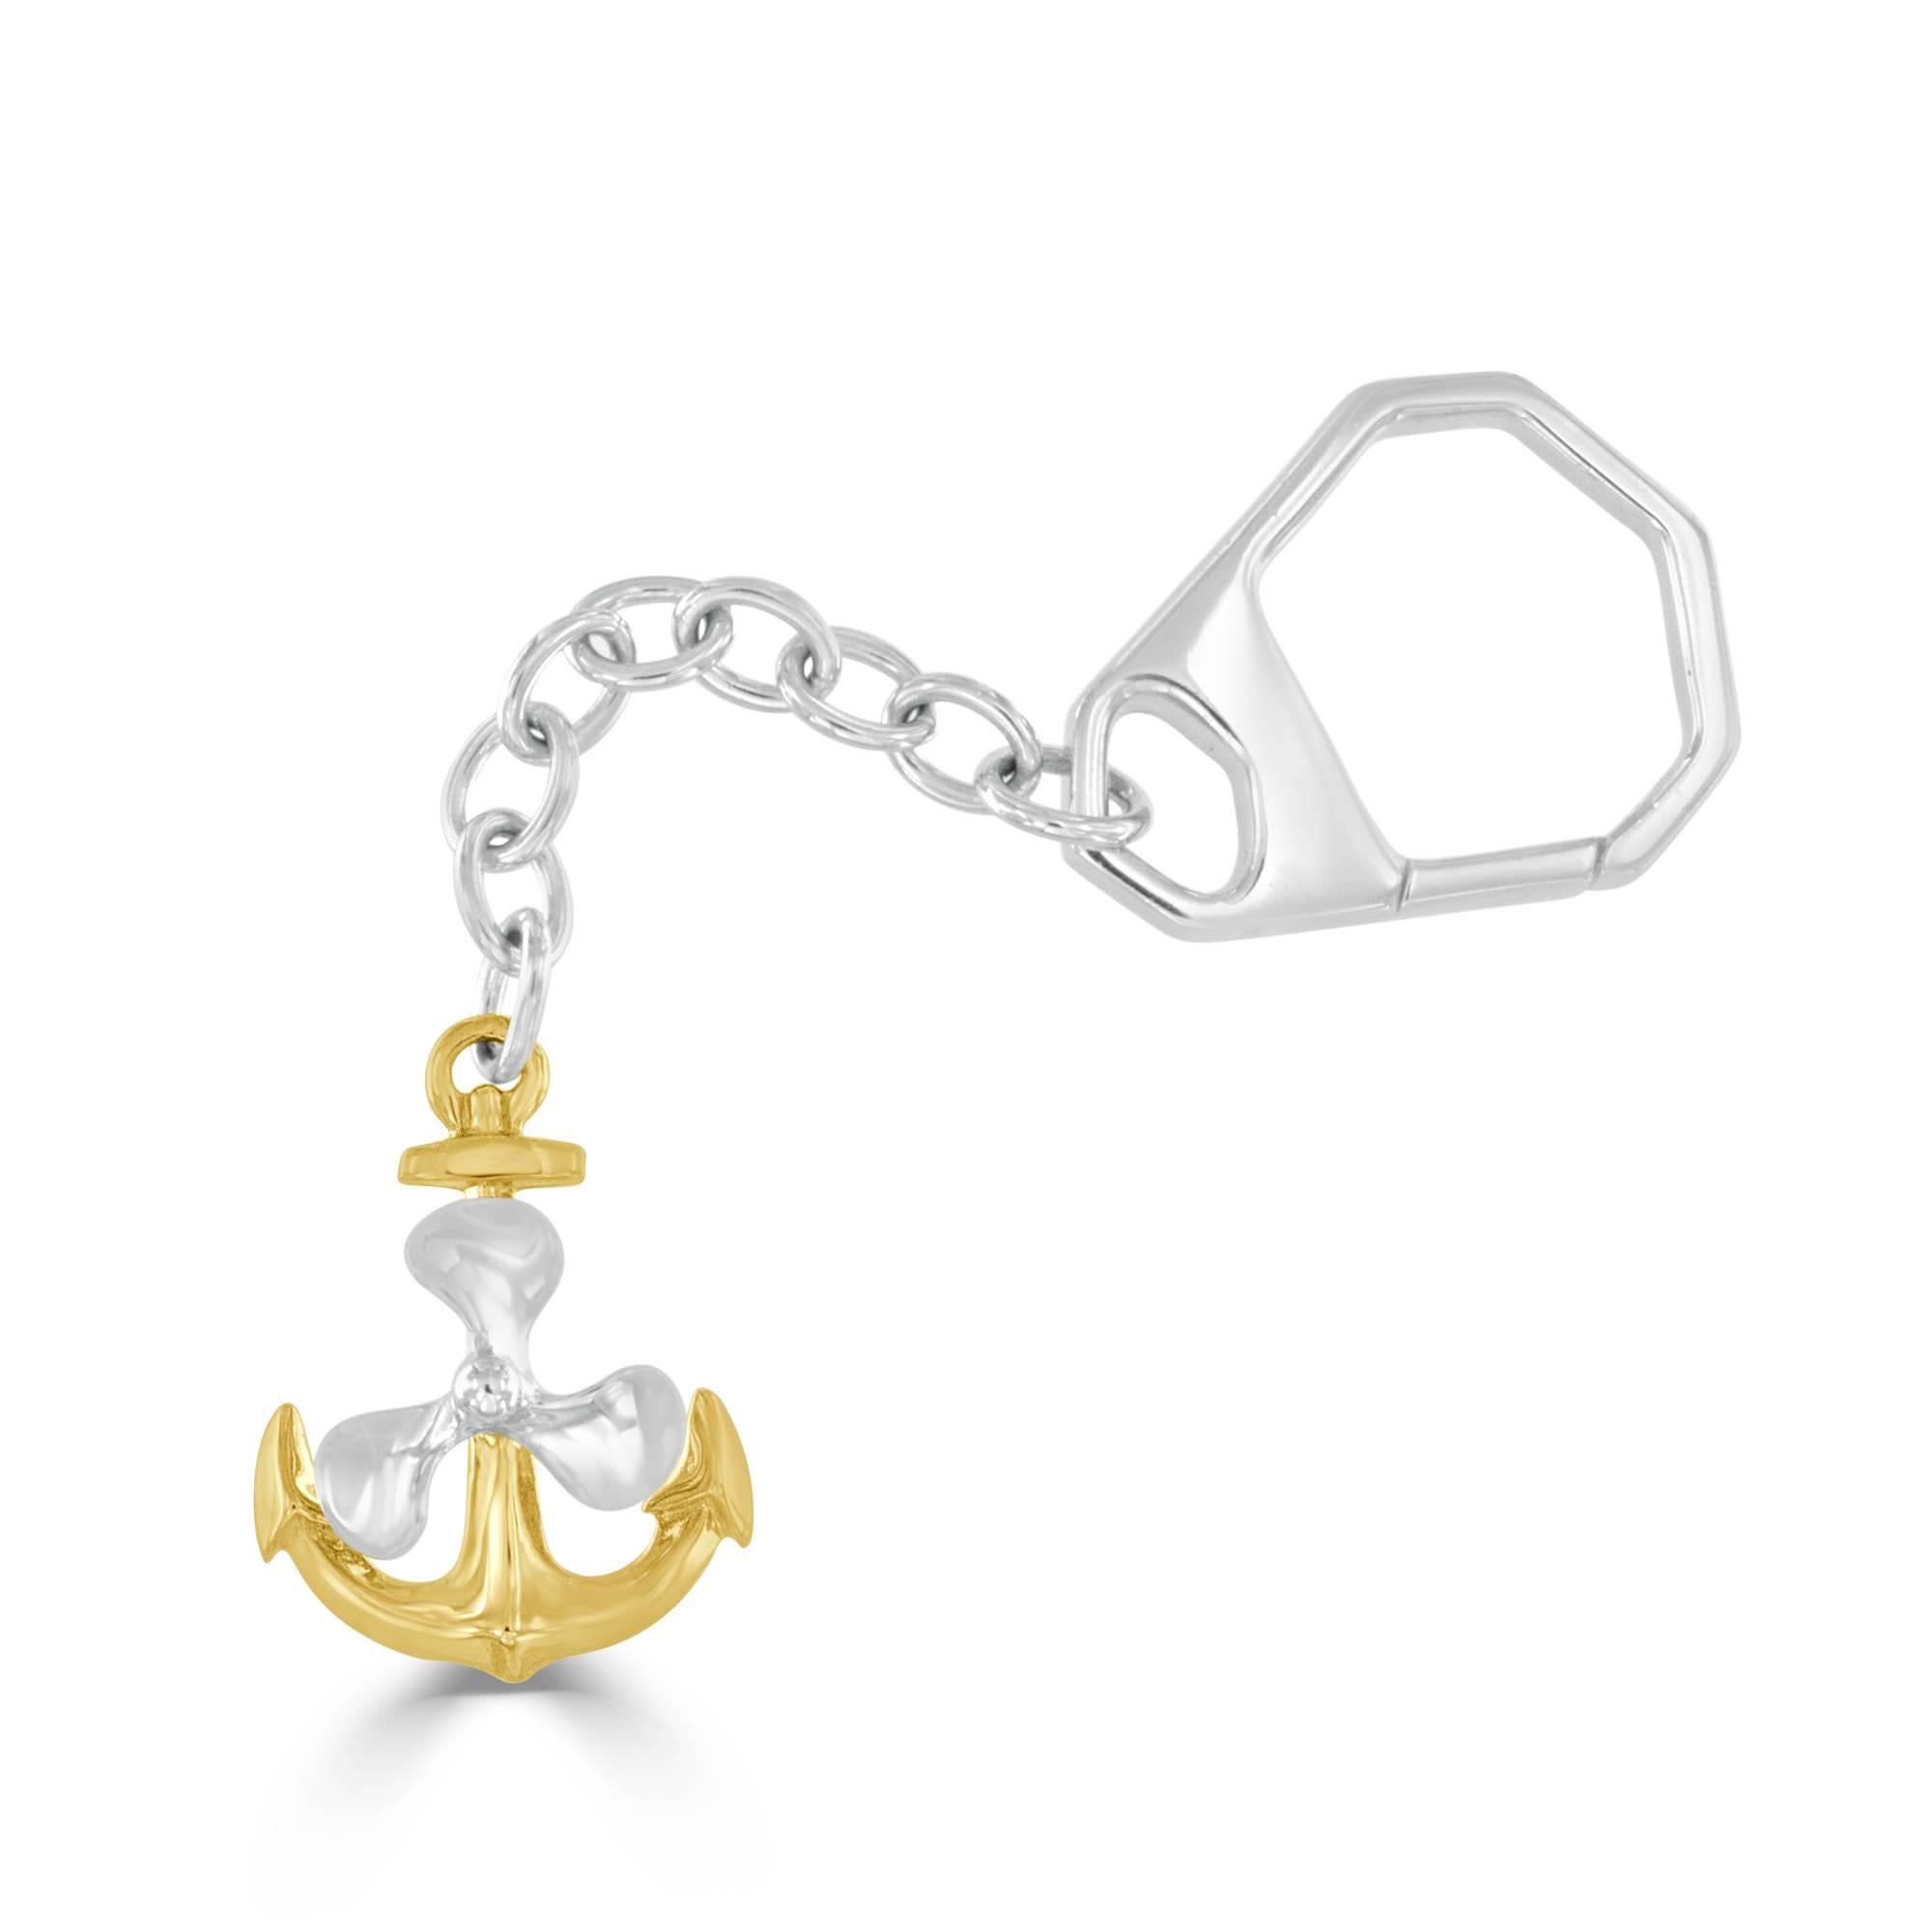 This nautical themed 14 karat white and yellow gold key chain features a white gold propeller that spins! The yellow gold anchor measures 1.0 inch in length and 0.75 inch in width. Entirety of the keychain measures 3.75 inches in length and weighs